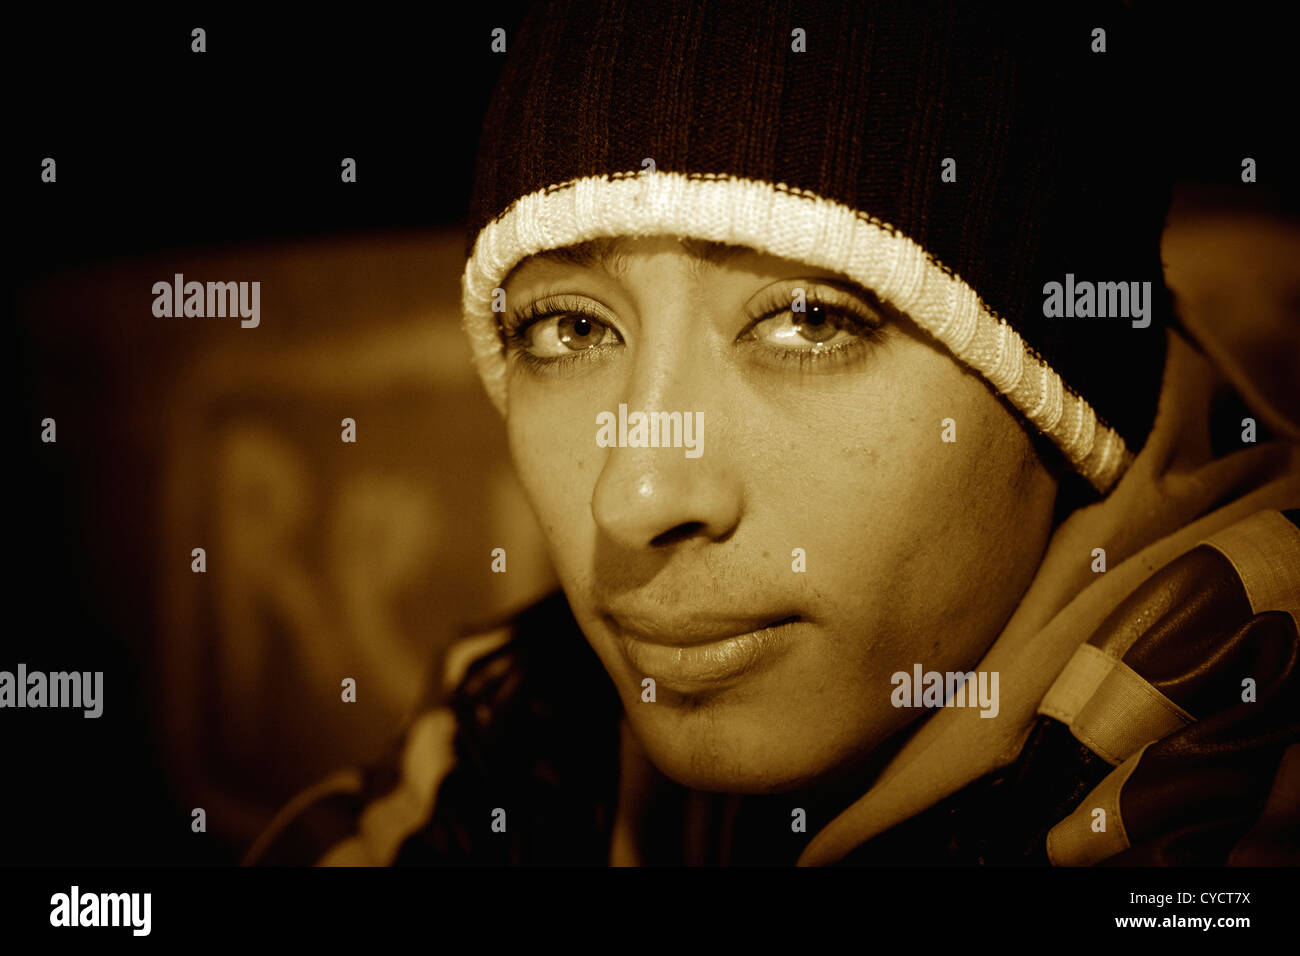 Egyptian boy with big eyes wearing a woolen hat. Stock Photo